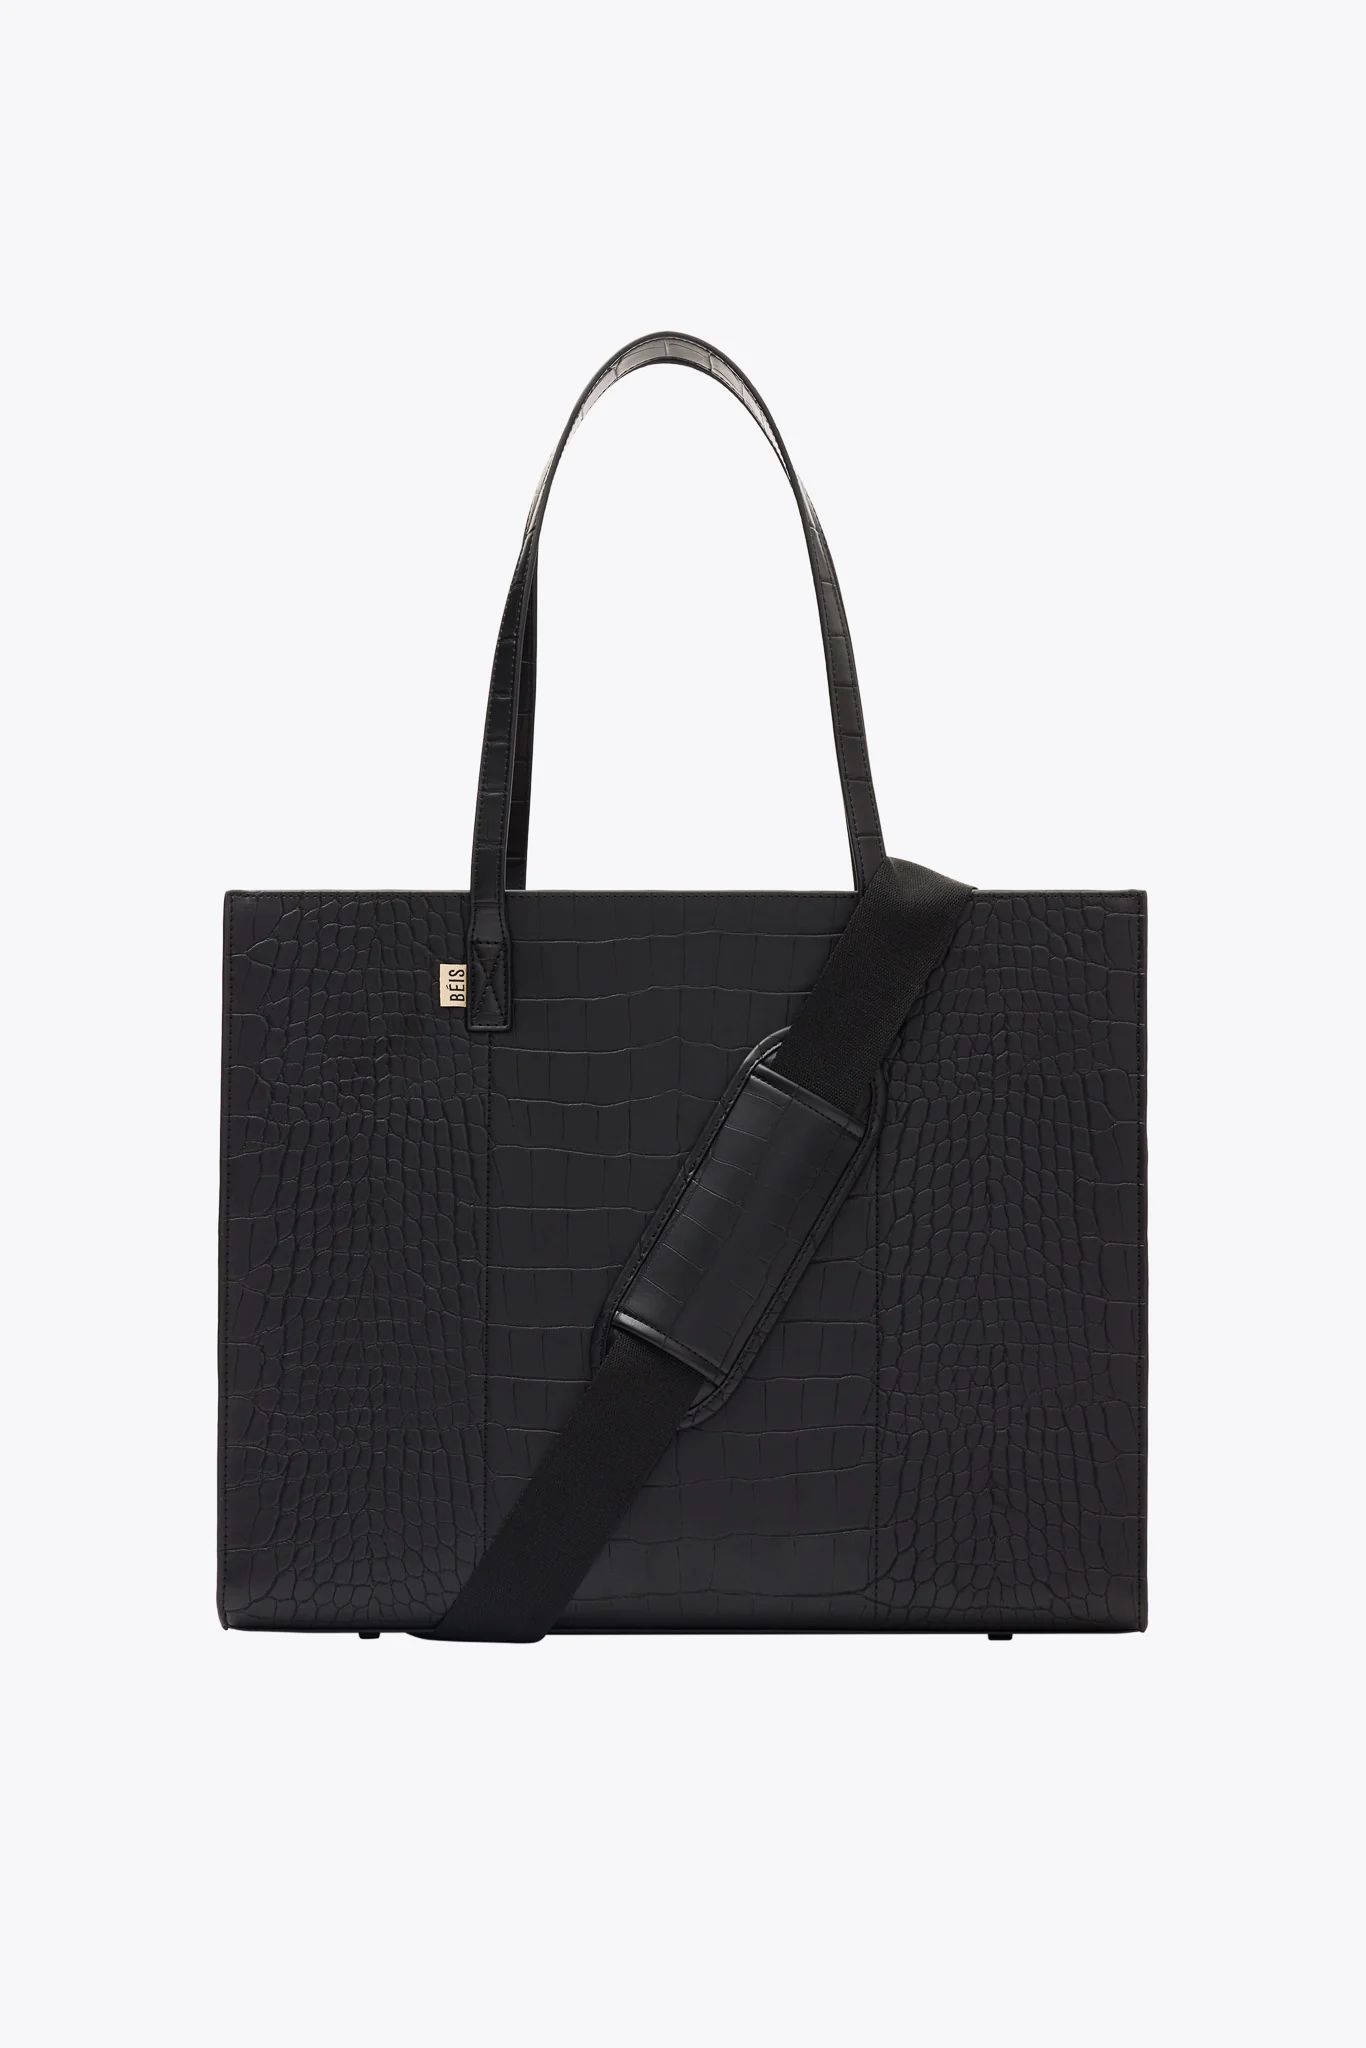 The Large Work Tote in Black Croc | BÉIS Travel